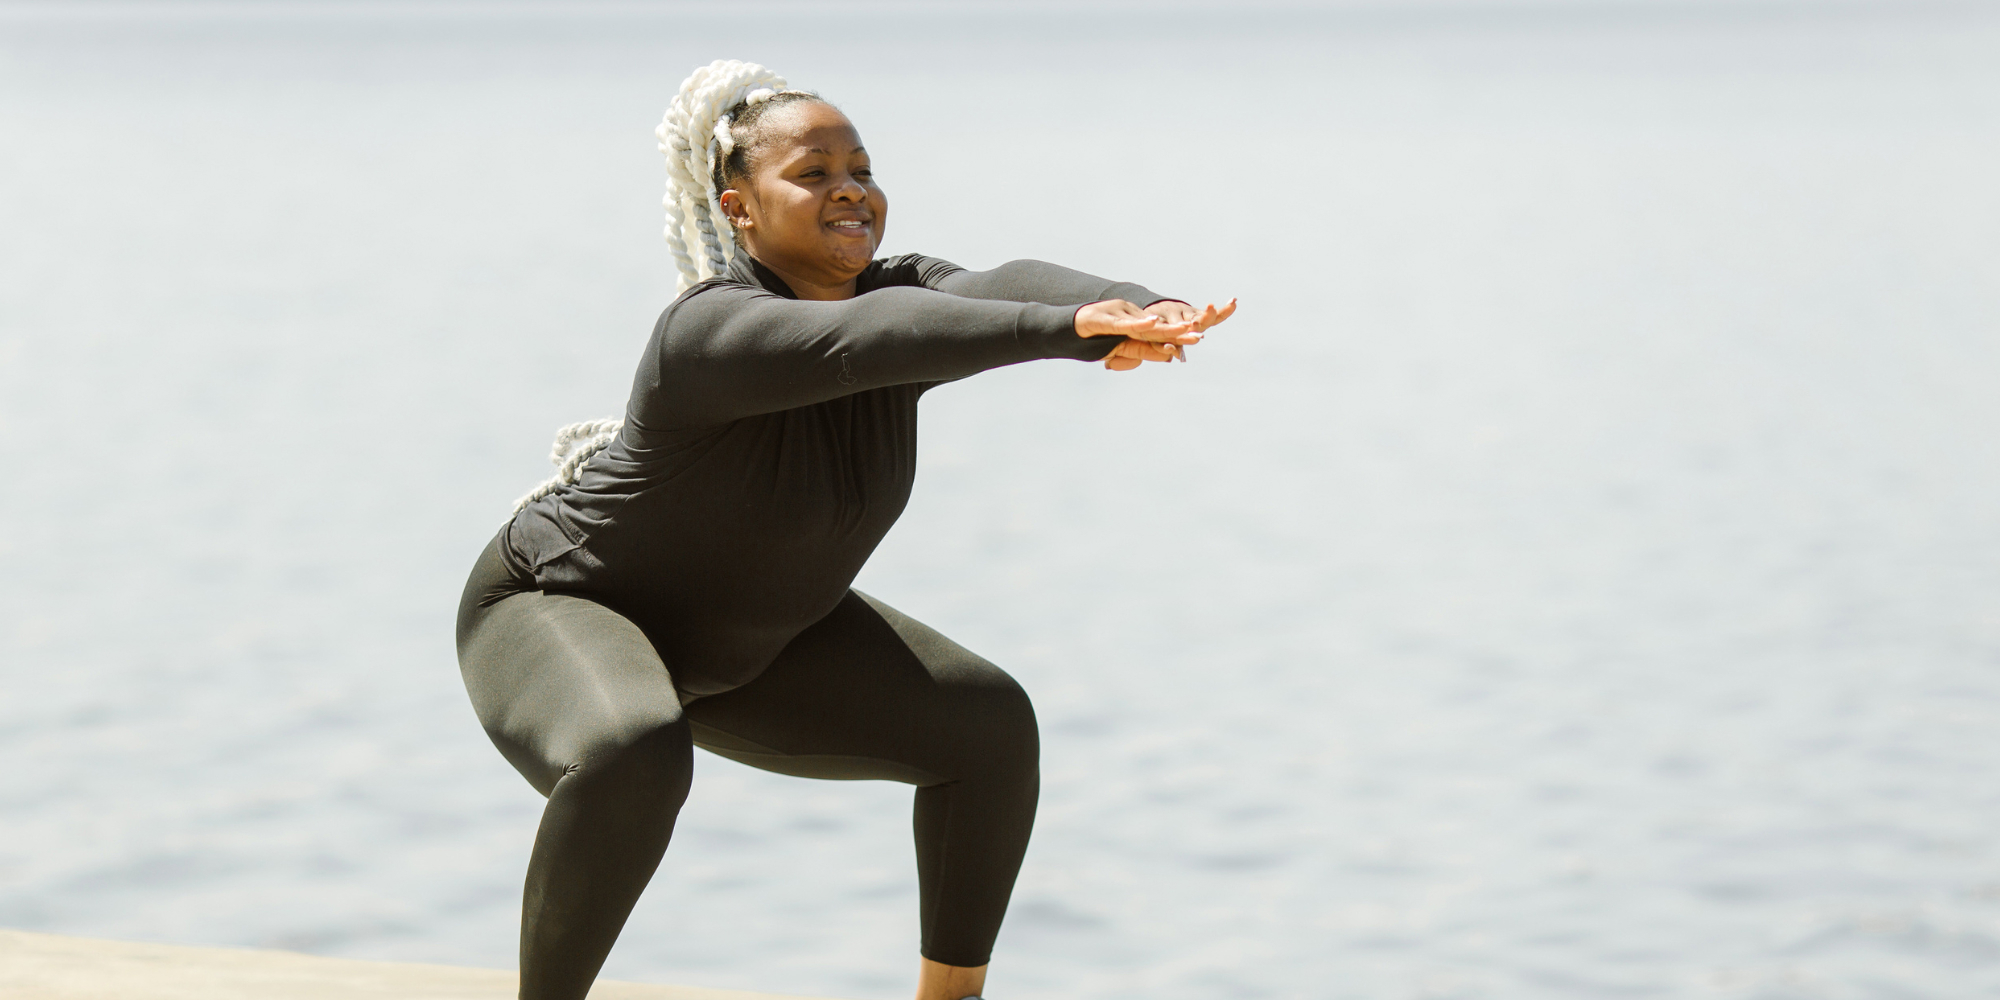 A woman exercising next to water to benefit her mental health.